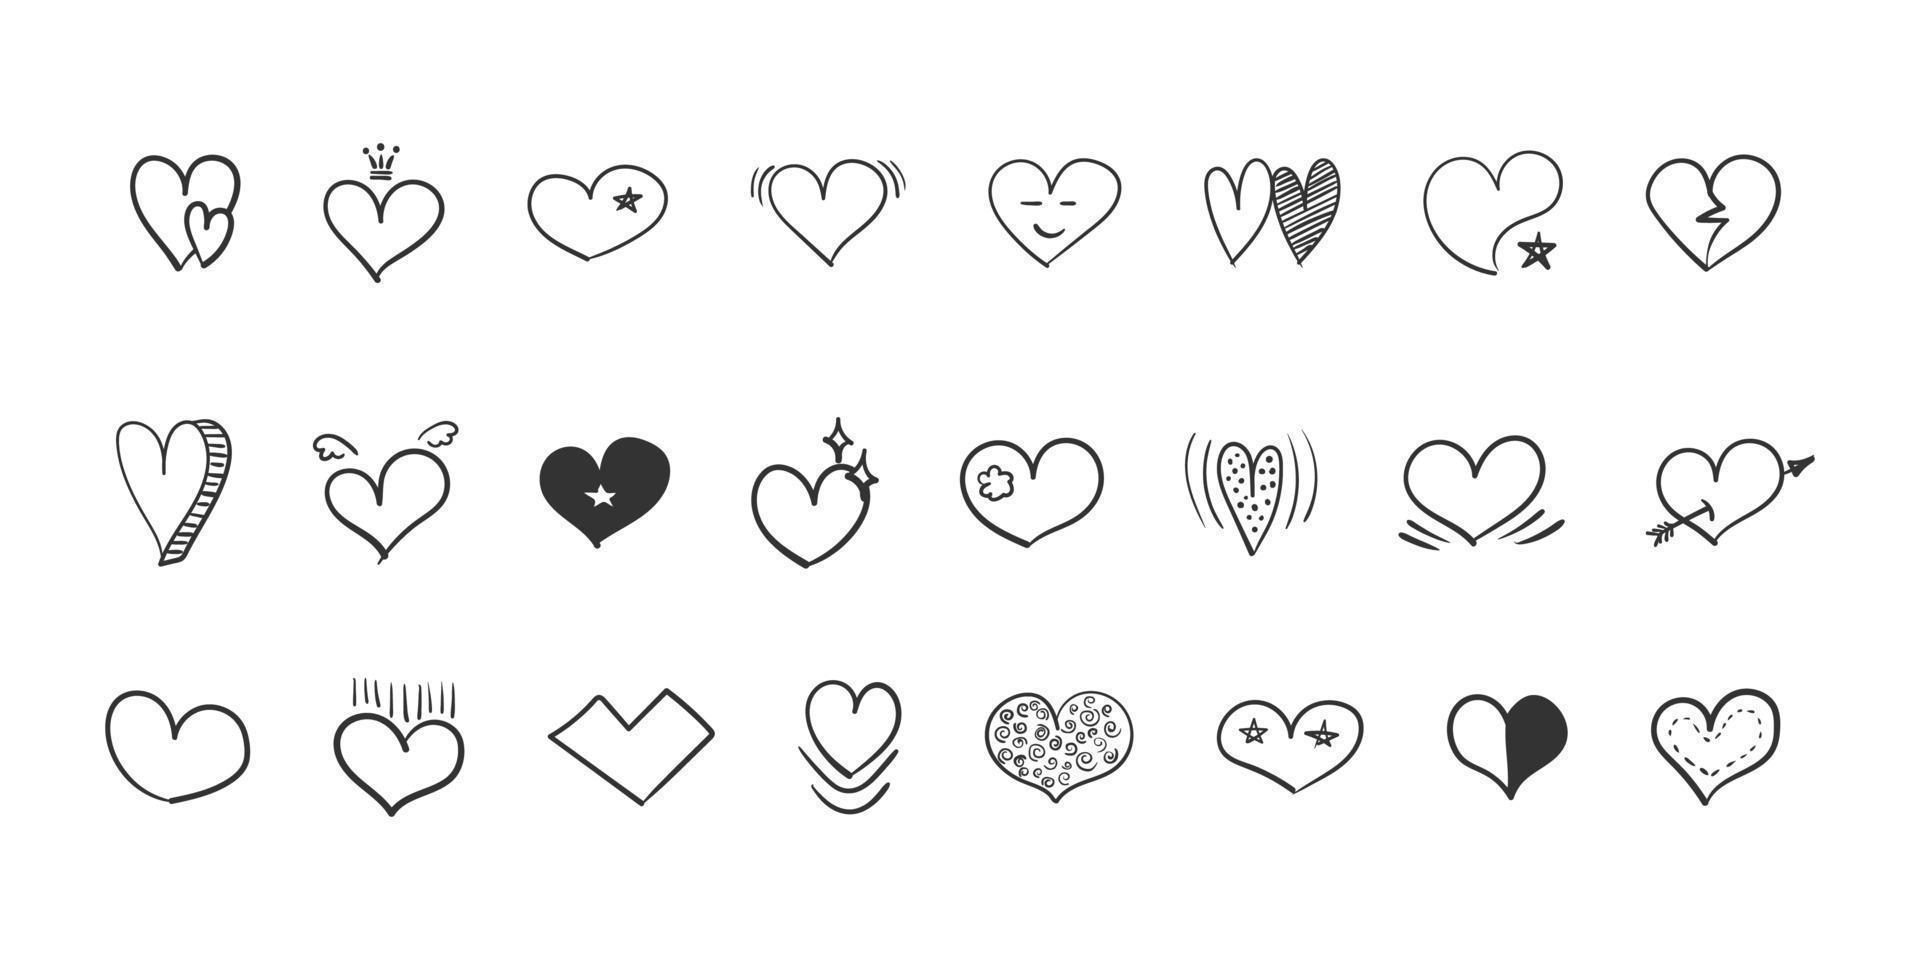 Heart icons set. Doodle hearts. Hand Drawn icon hearts isolated on white background. Trendy design. Vector illustration